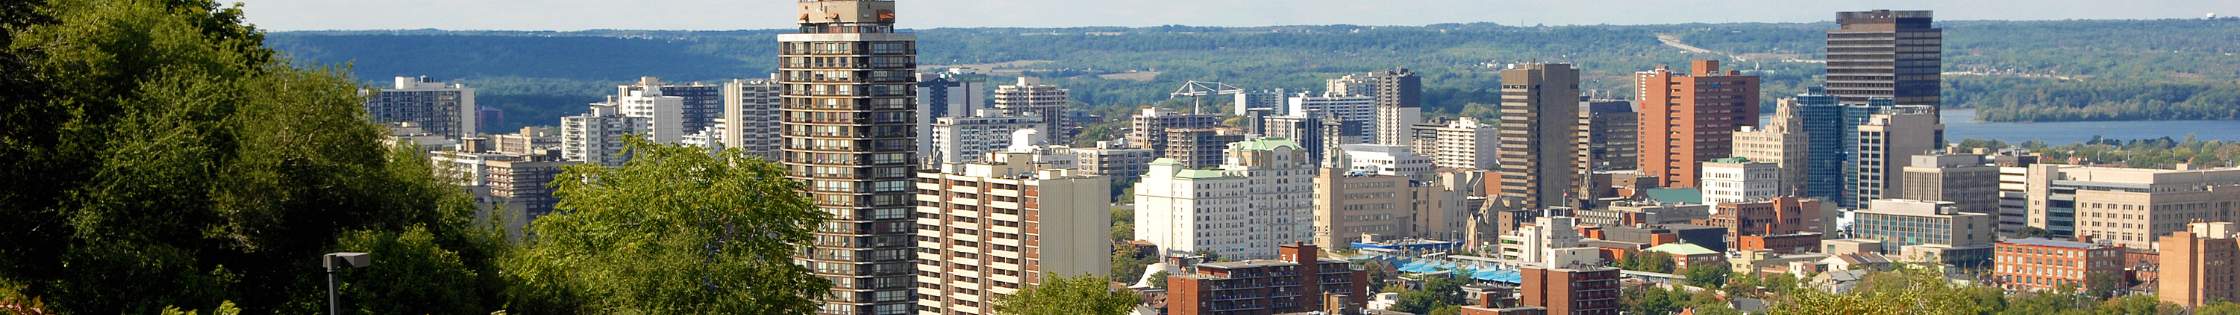 Picture of the City of Hamilton